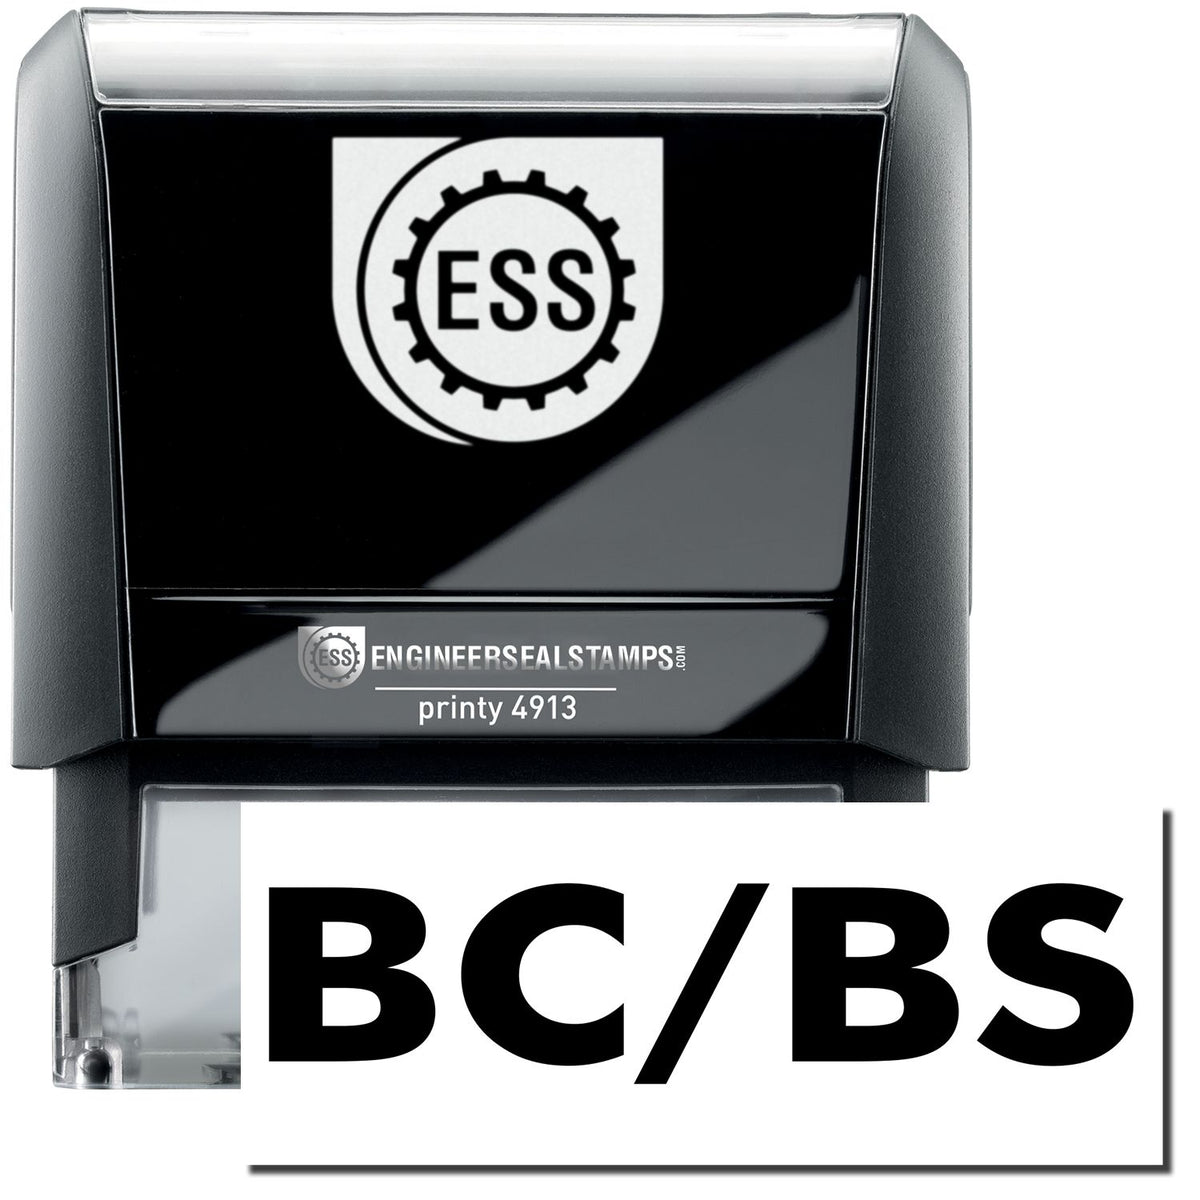 A self-inking stamp with a stamped image showing how the text &quot;BC/BS&quot; in a large bold font is displayed by it.